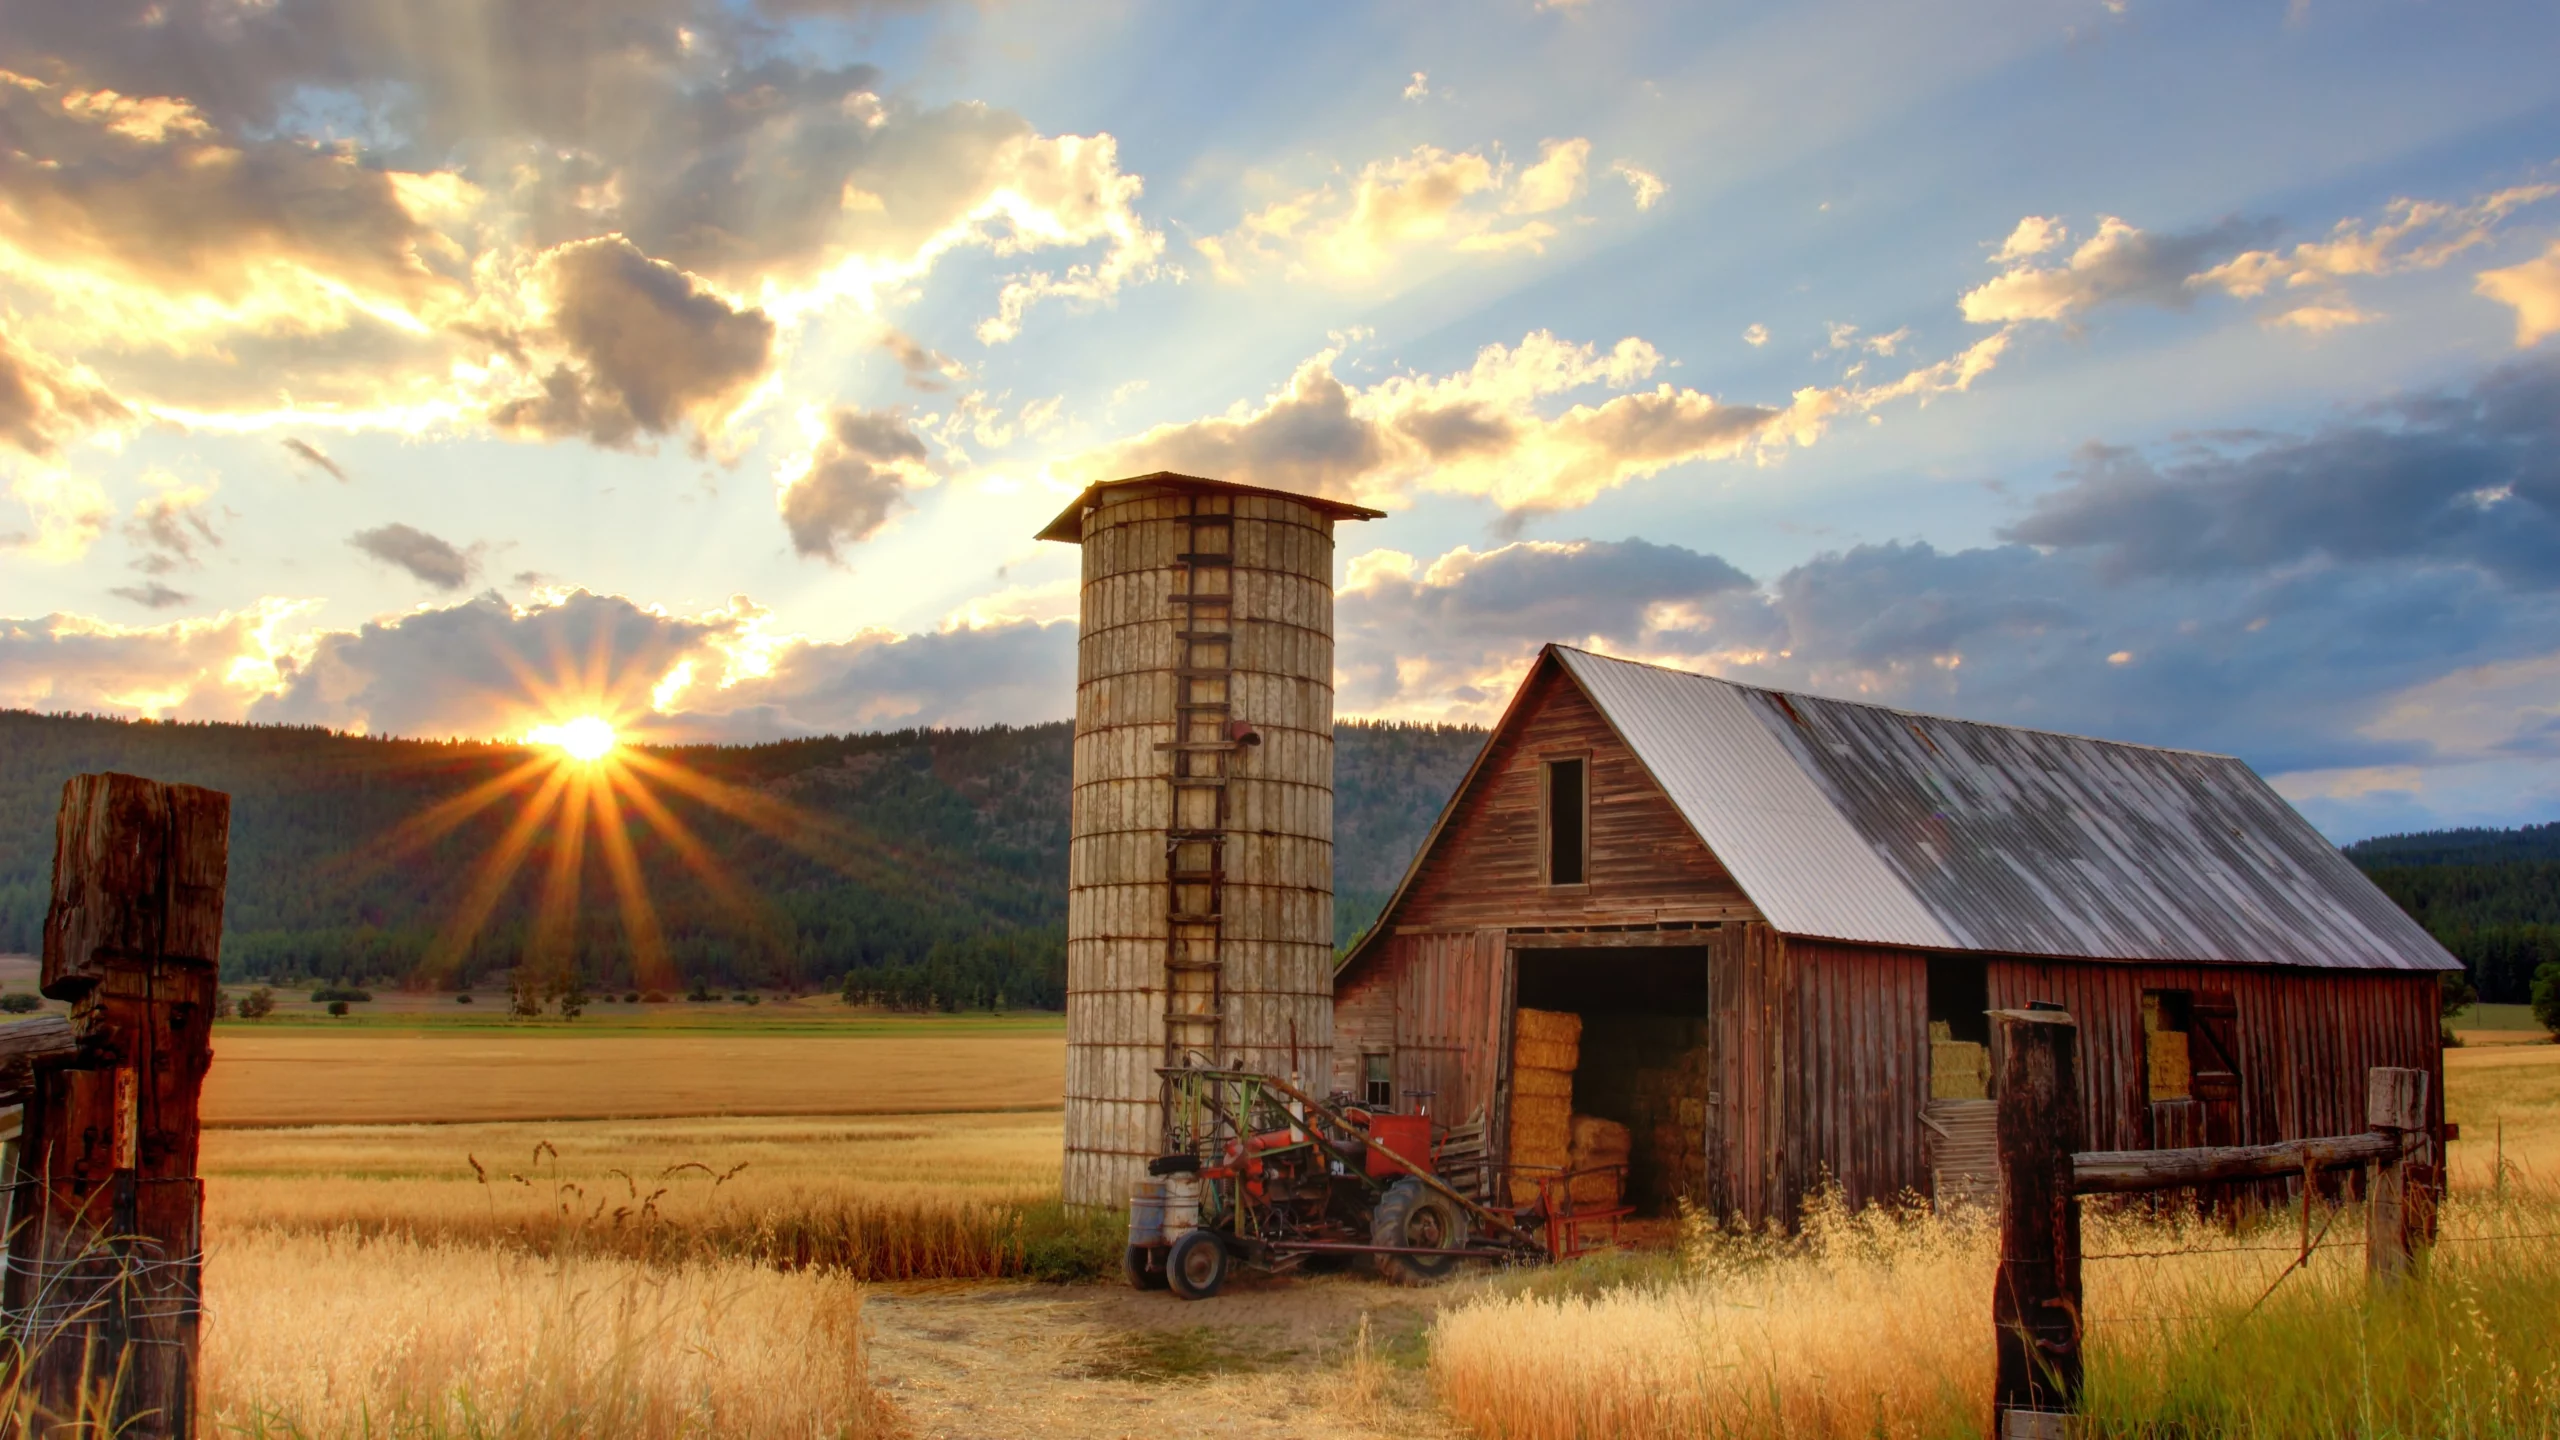 Farm sunset with an old rustic barn capturing the essence of rural life.